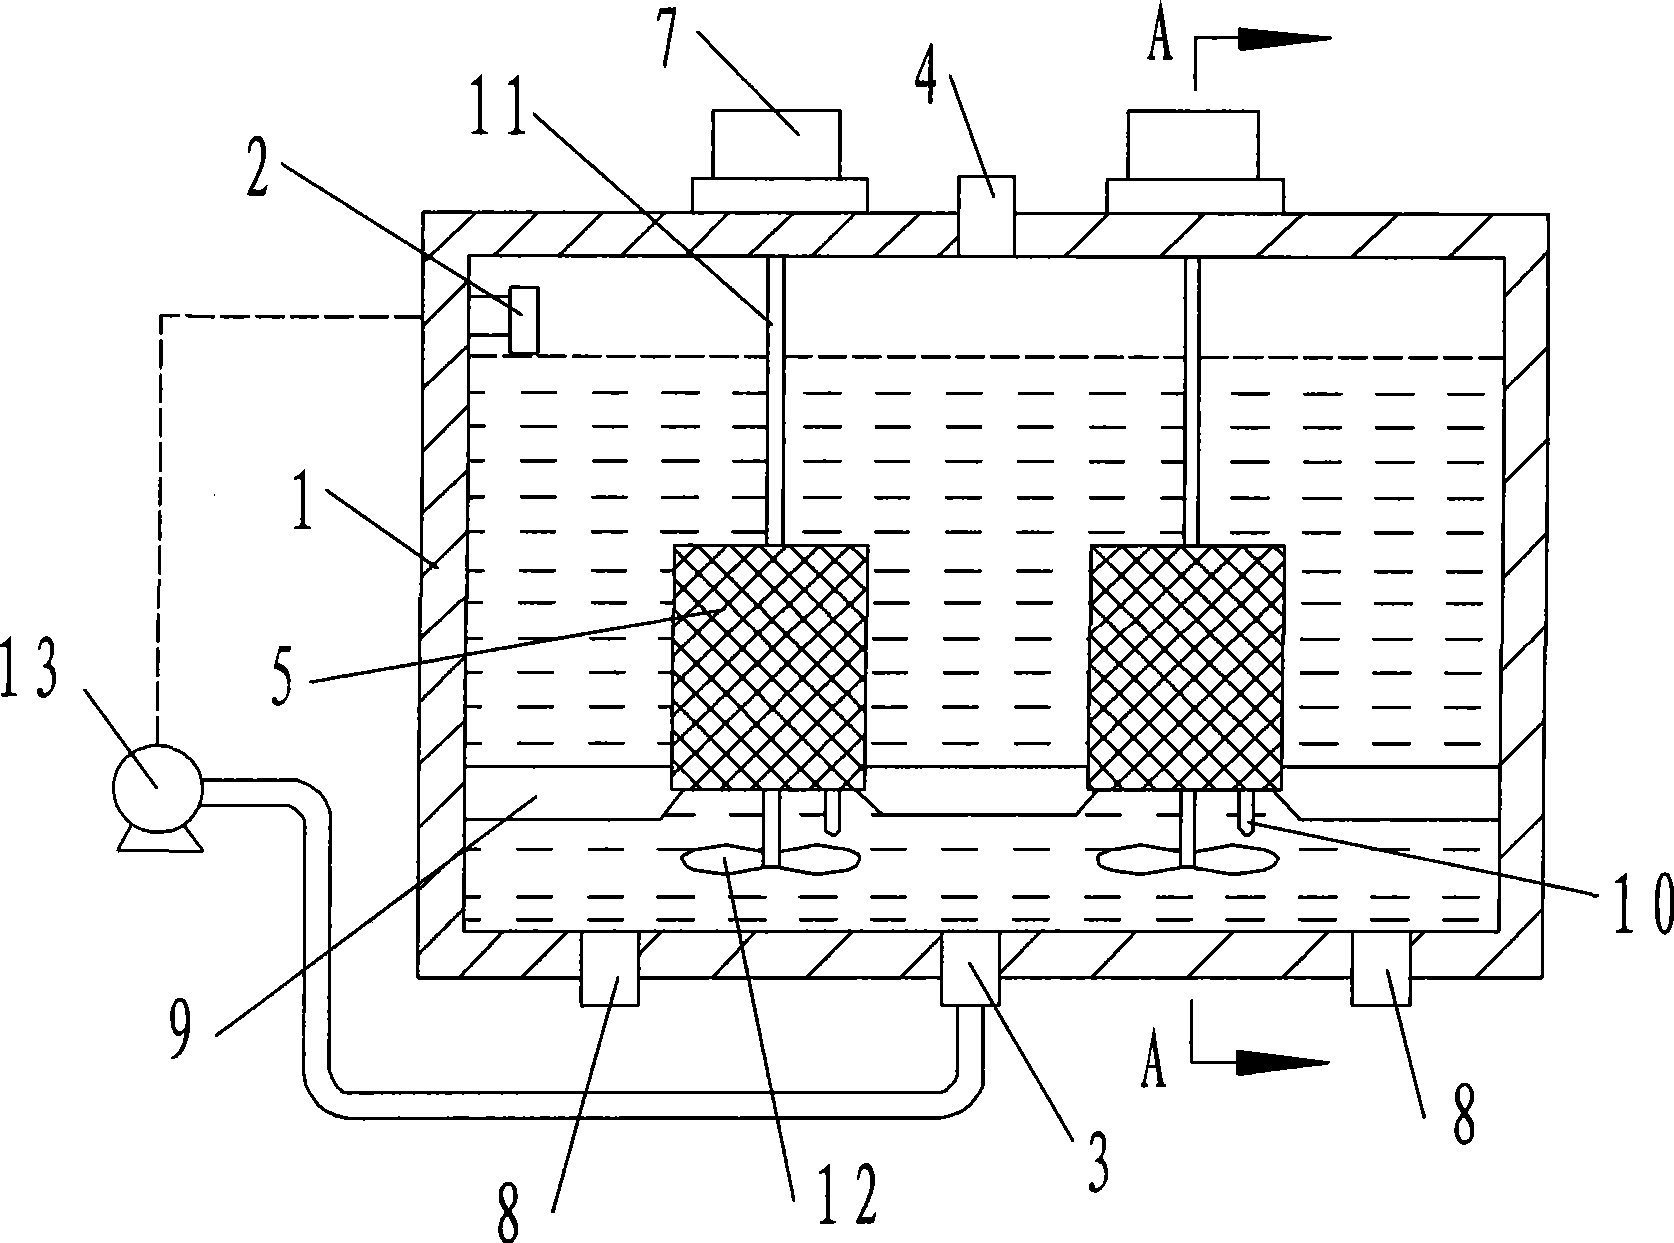 Integral anaerobic dynamic membrane bioreactor and method of operation